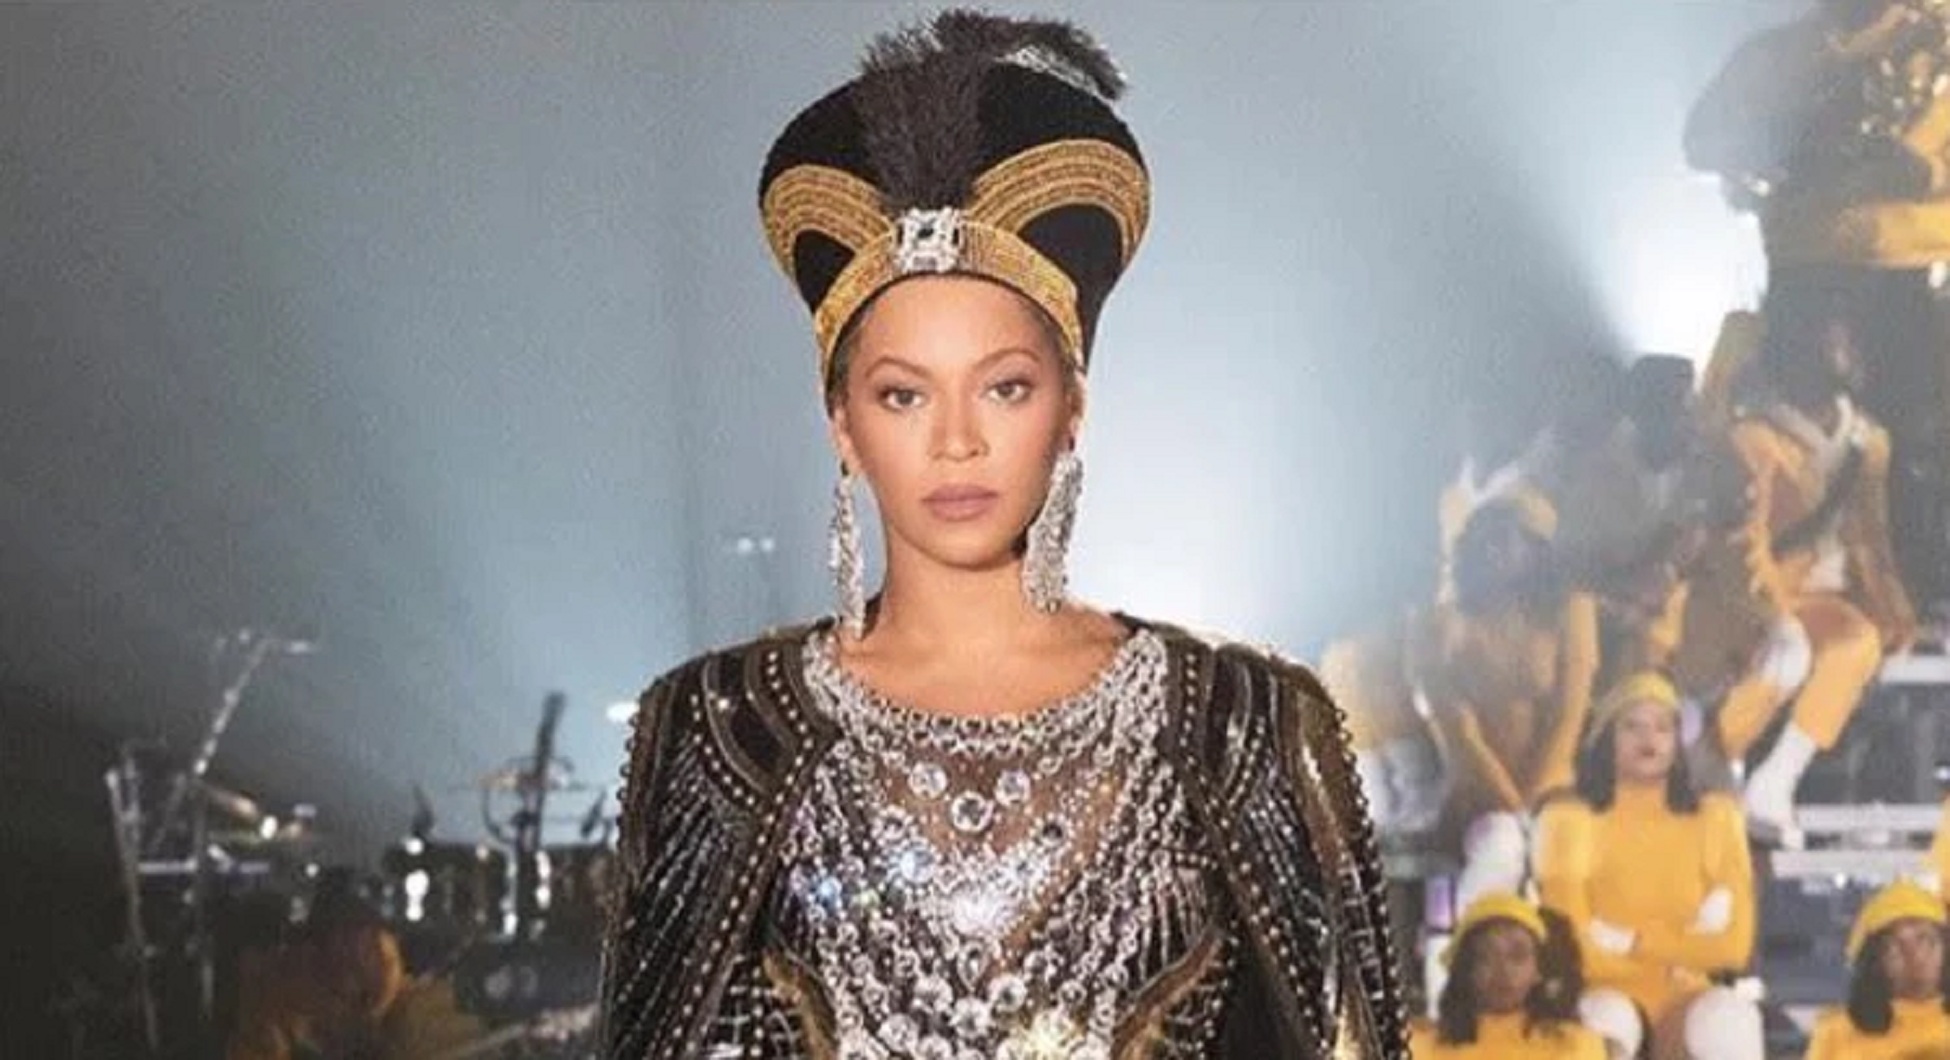 Beyonce Wins at National Film & TV Awards For Her ‘Performance’ in The Lion King as Nala!